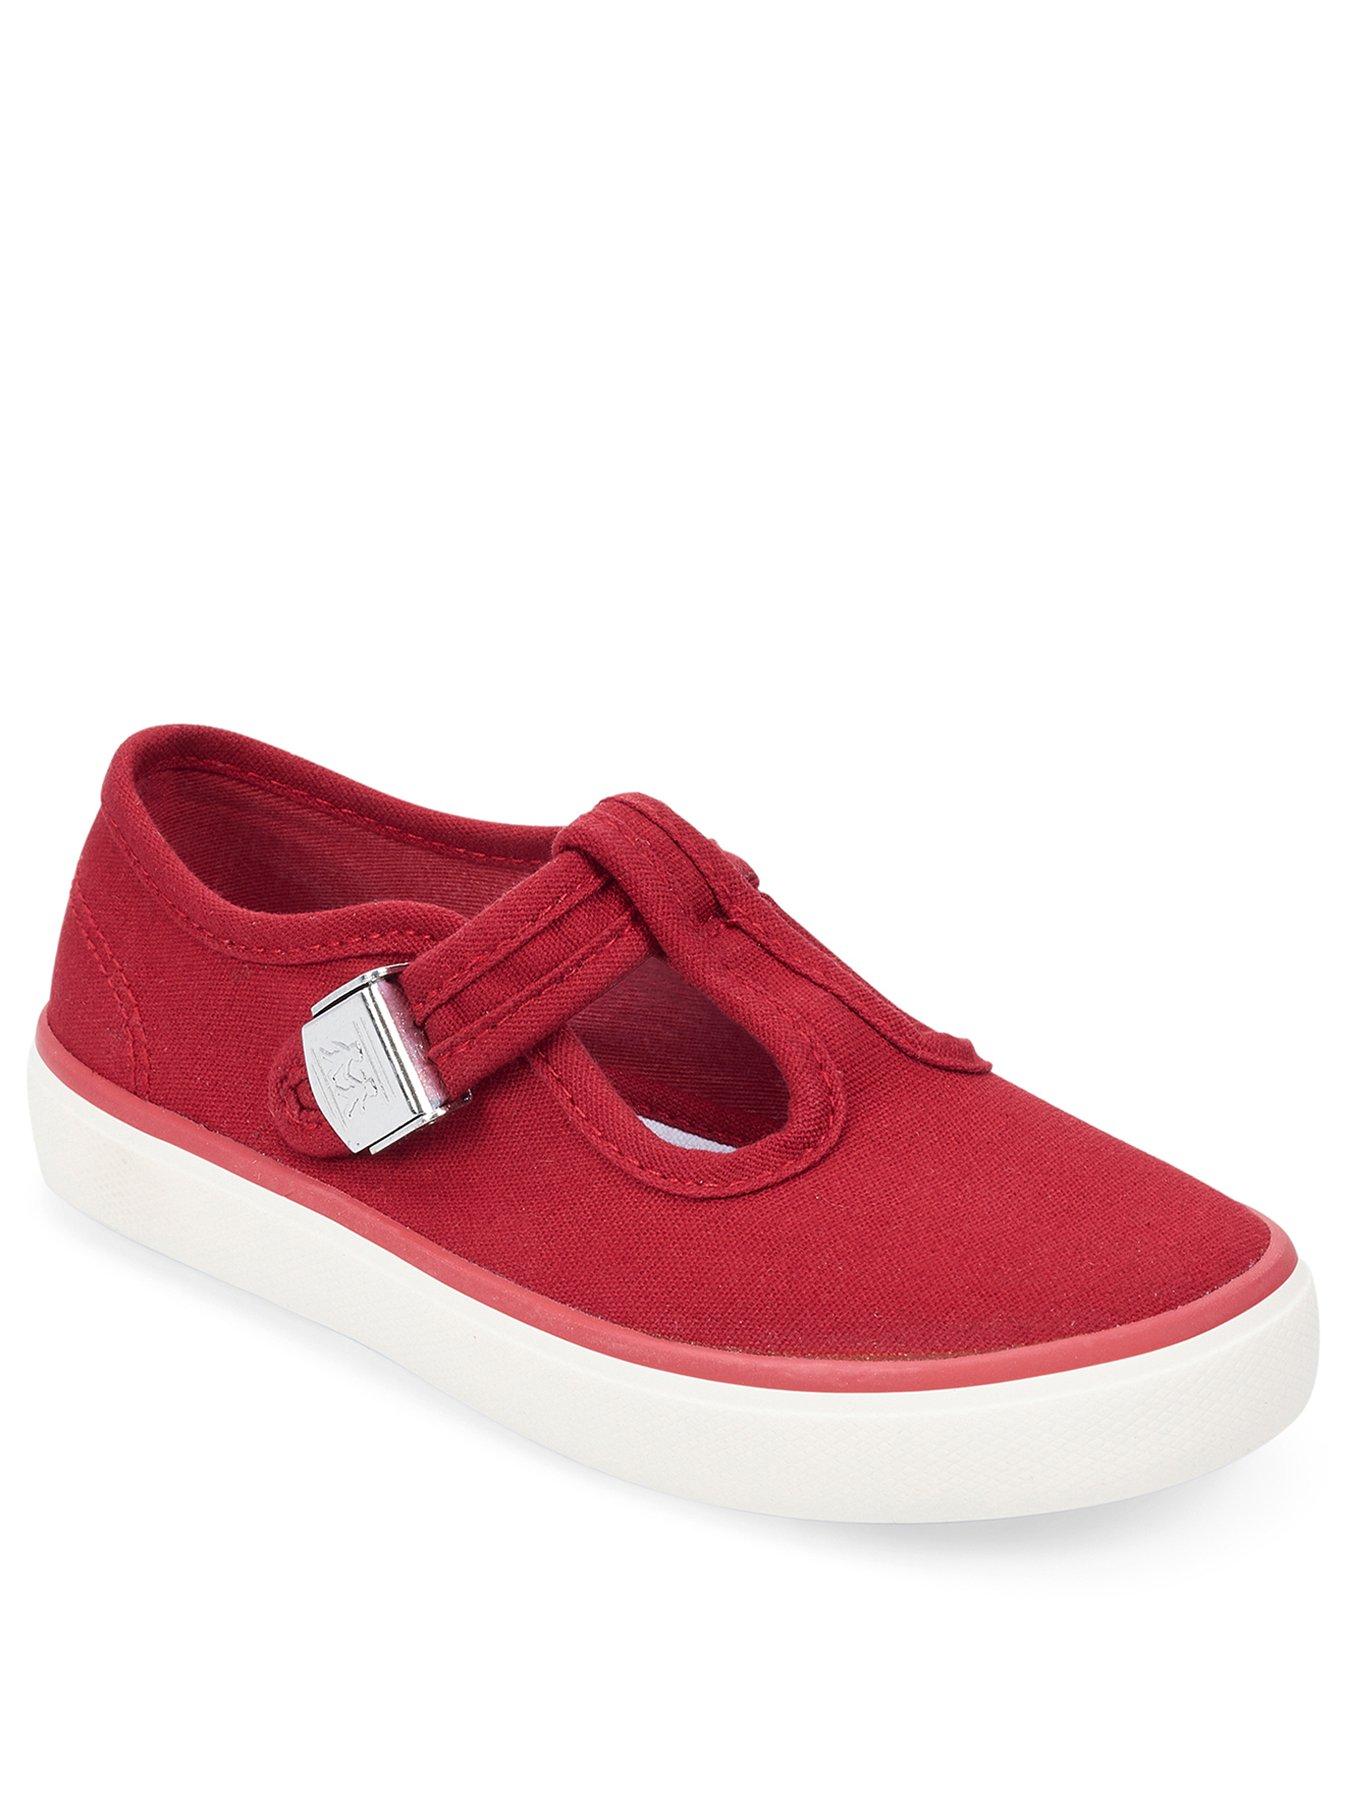 Shoes & boots Treasure T-bar Canvas Shoe - Red